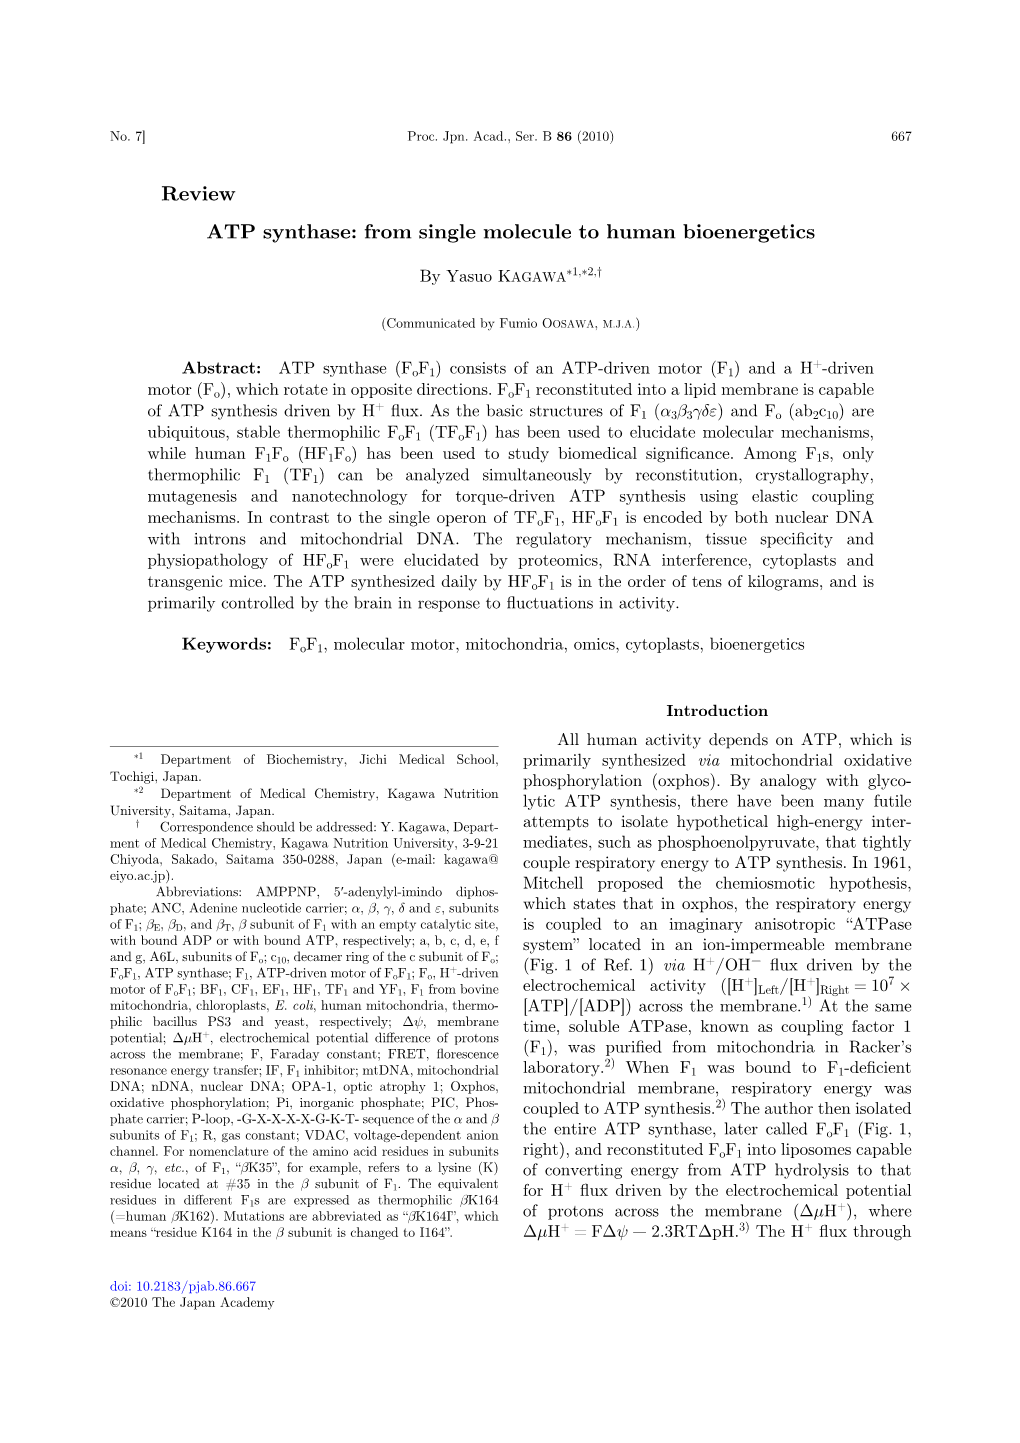 ATP Synthase: from Single Molecule to Human Bioenergetics